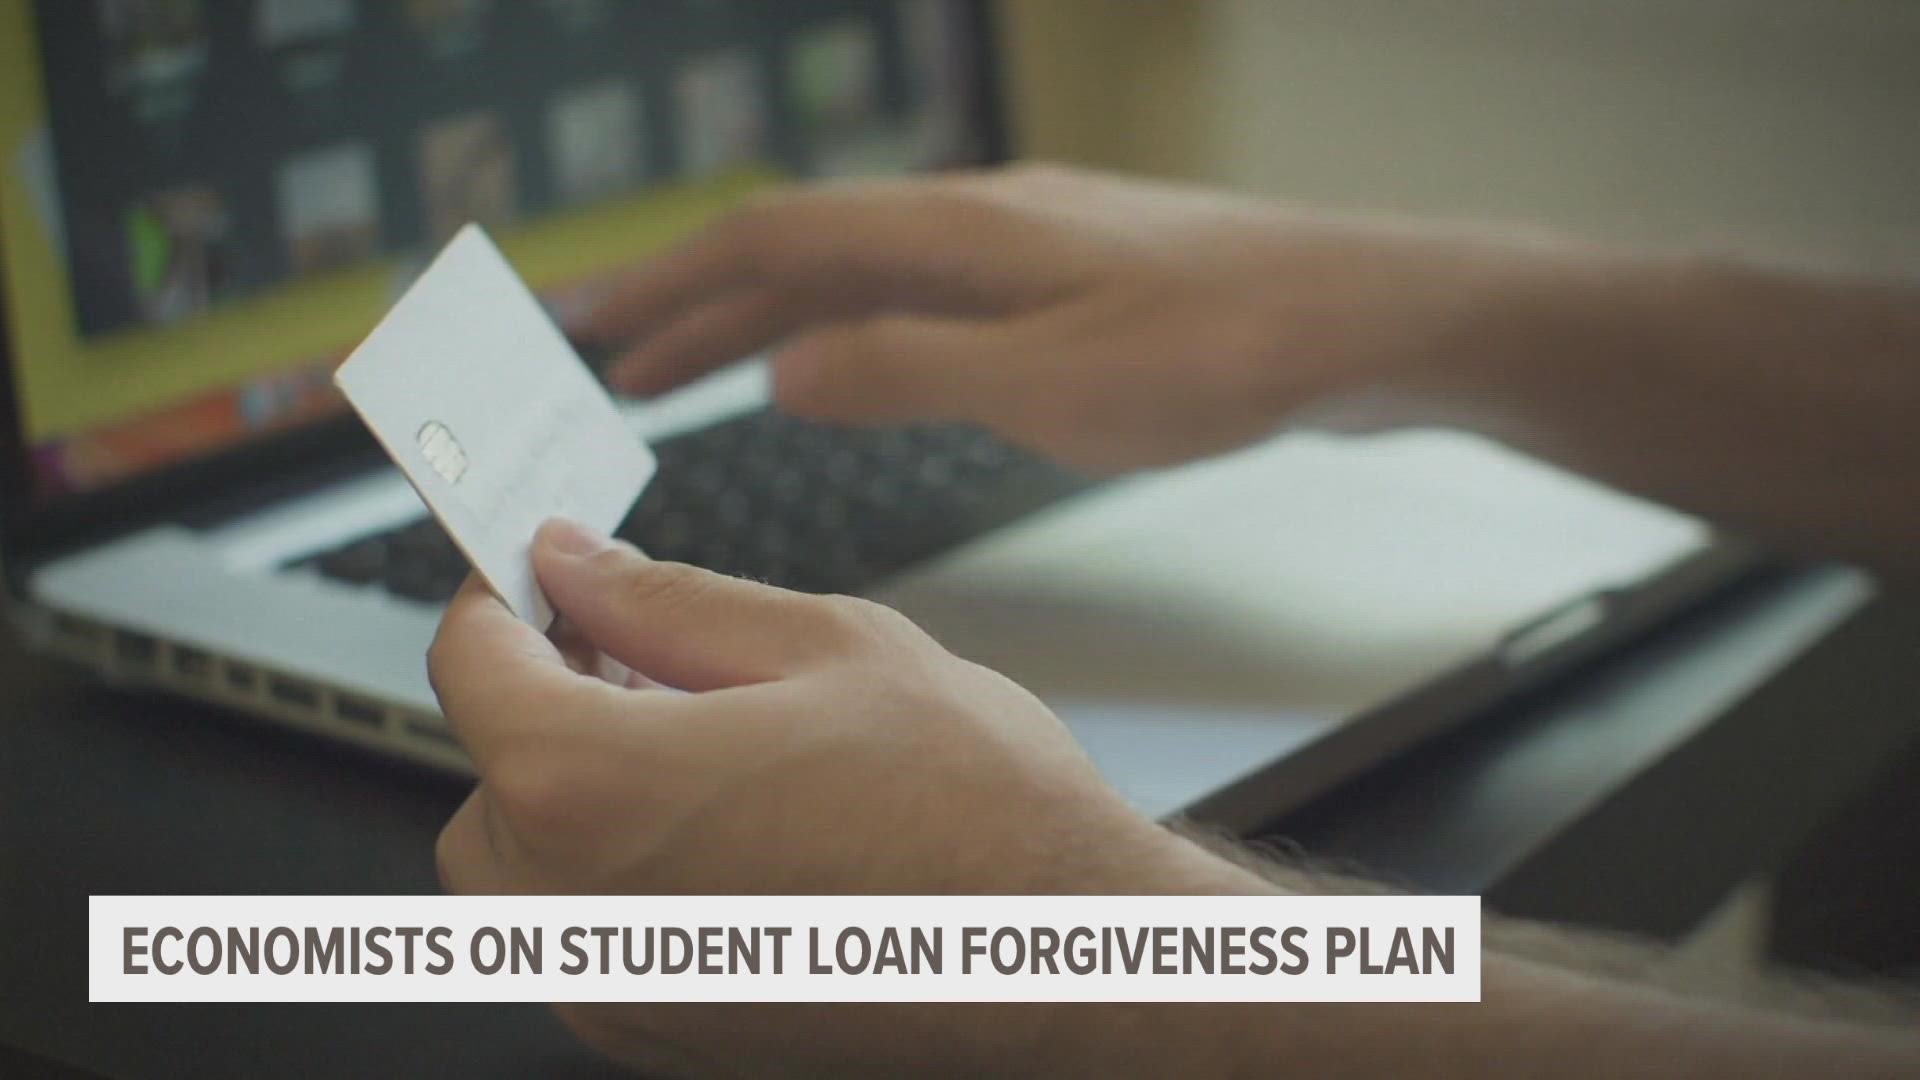 There's $1.7 trillion in student loan debt owed in the U.S., and economists say that forgiving some of that means different things for borrowers and the economy.